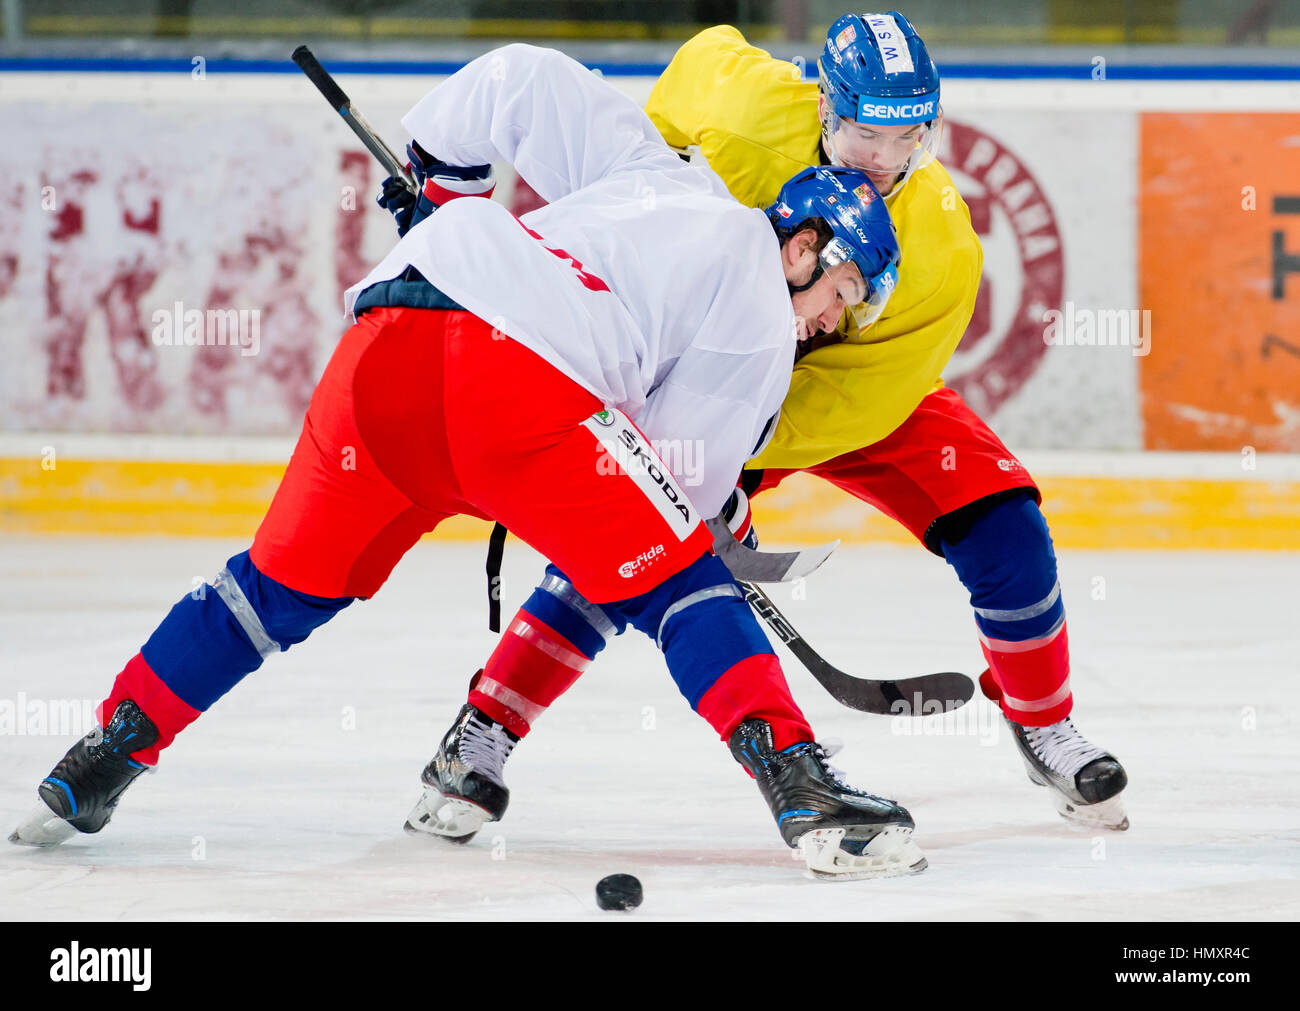 Prague, Czech Republic. 07th Feb, 2017. The Czech national ice-hockey team's players JAN KOVAR (left) and MICHAL BIRNER in action during the training session prior to the February Sweden Games in Gothenburg in Prague, Czech Republic, February 7, 2017. Sweden Games, the third part of the European Hockey Tour (EHT) series, will take place on February 9-12. Credit: Vit Simanek/CTK Photo/Alamy Live News Stock Photo